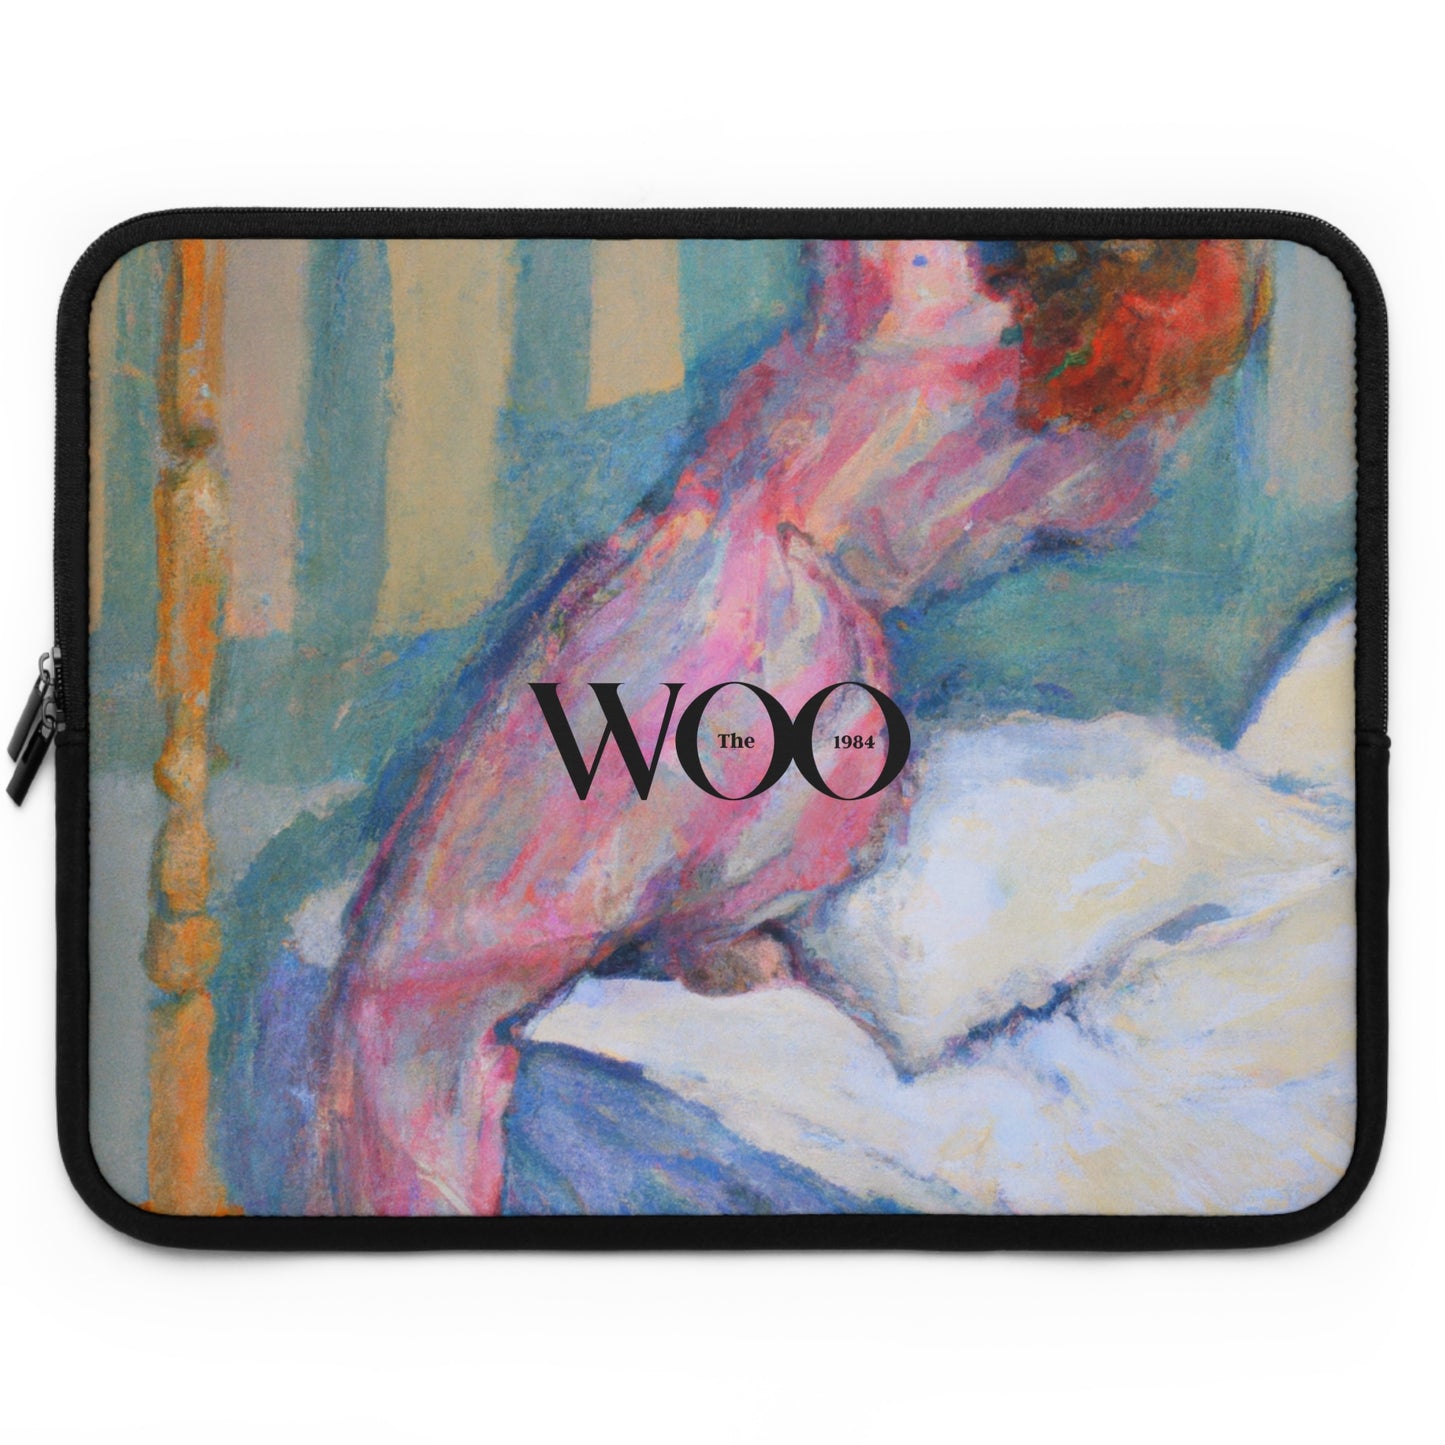 WFB 'Work From bed' - Laptop Sleeve